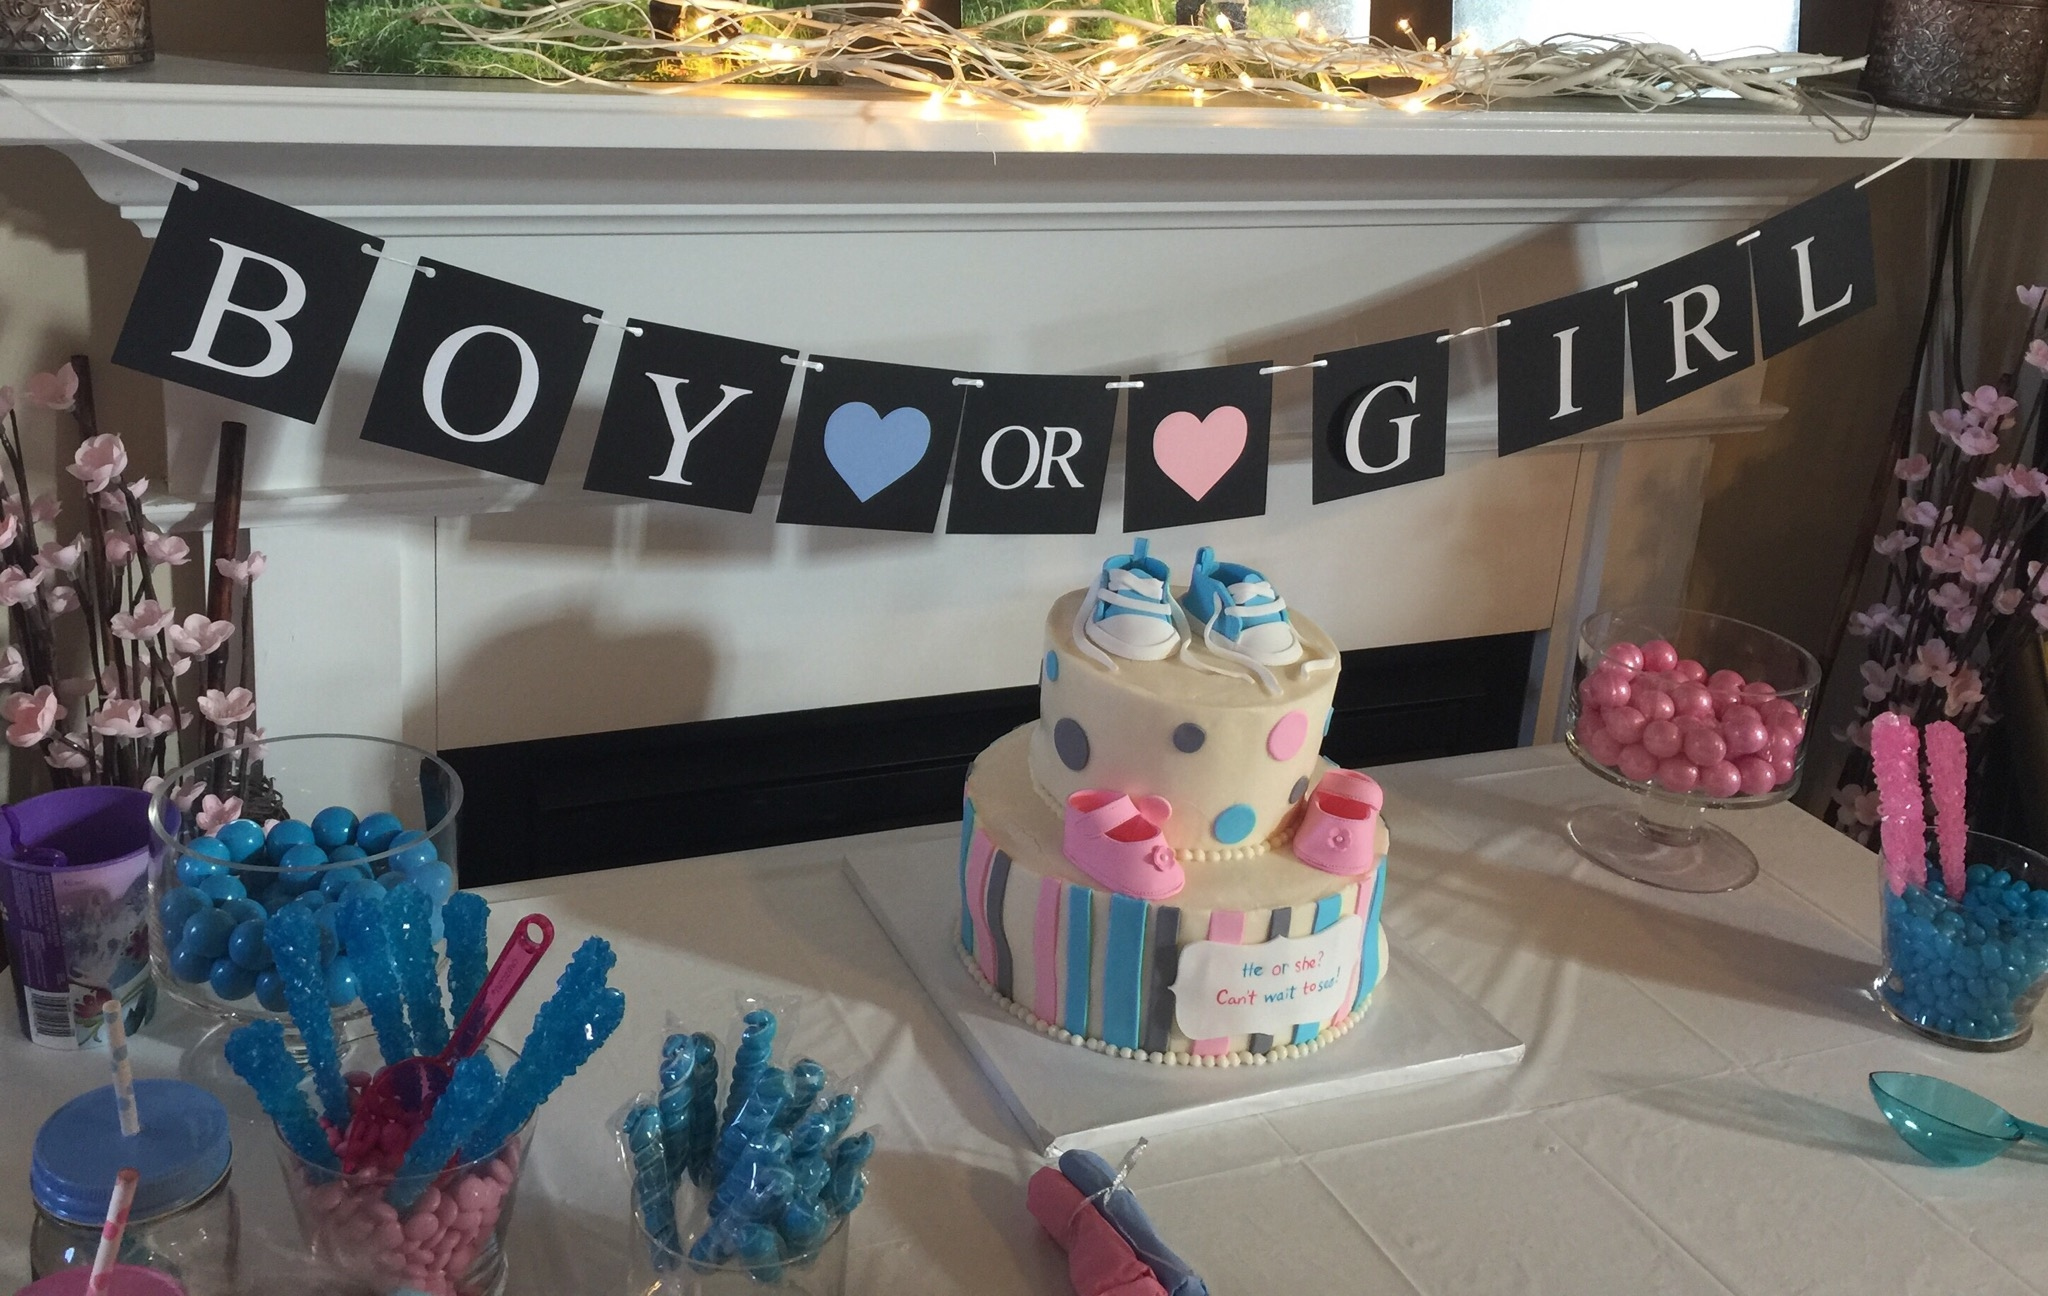 Dallas family's baby gender reveal party takes emotional turn